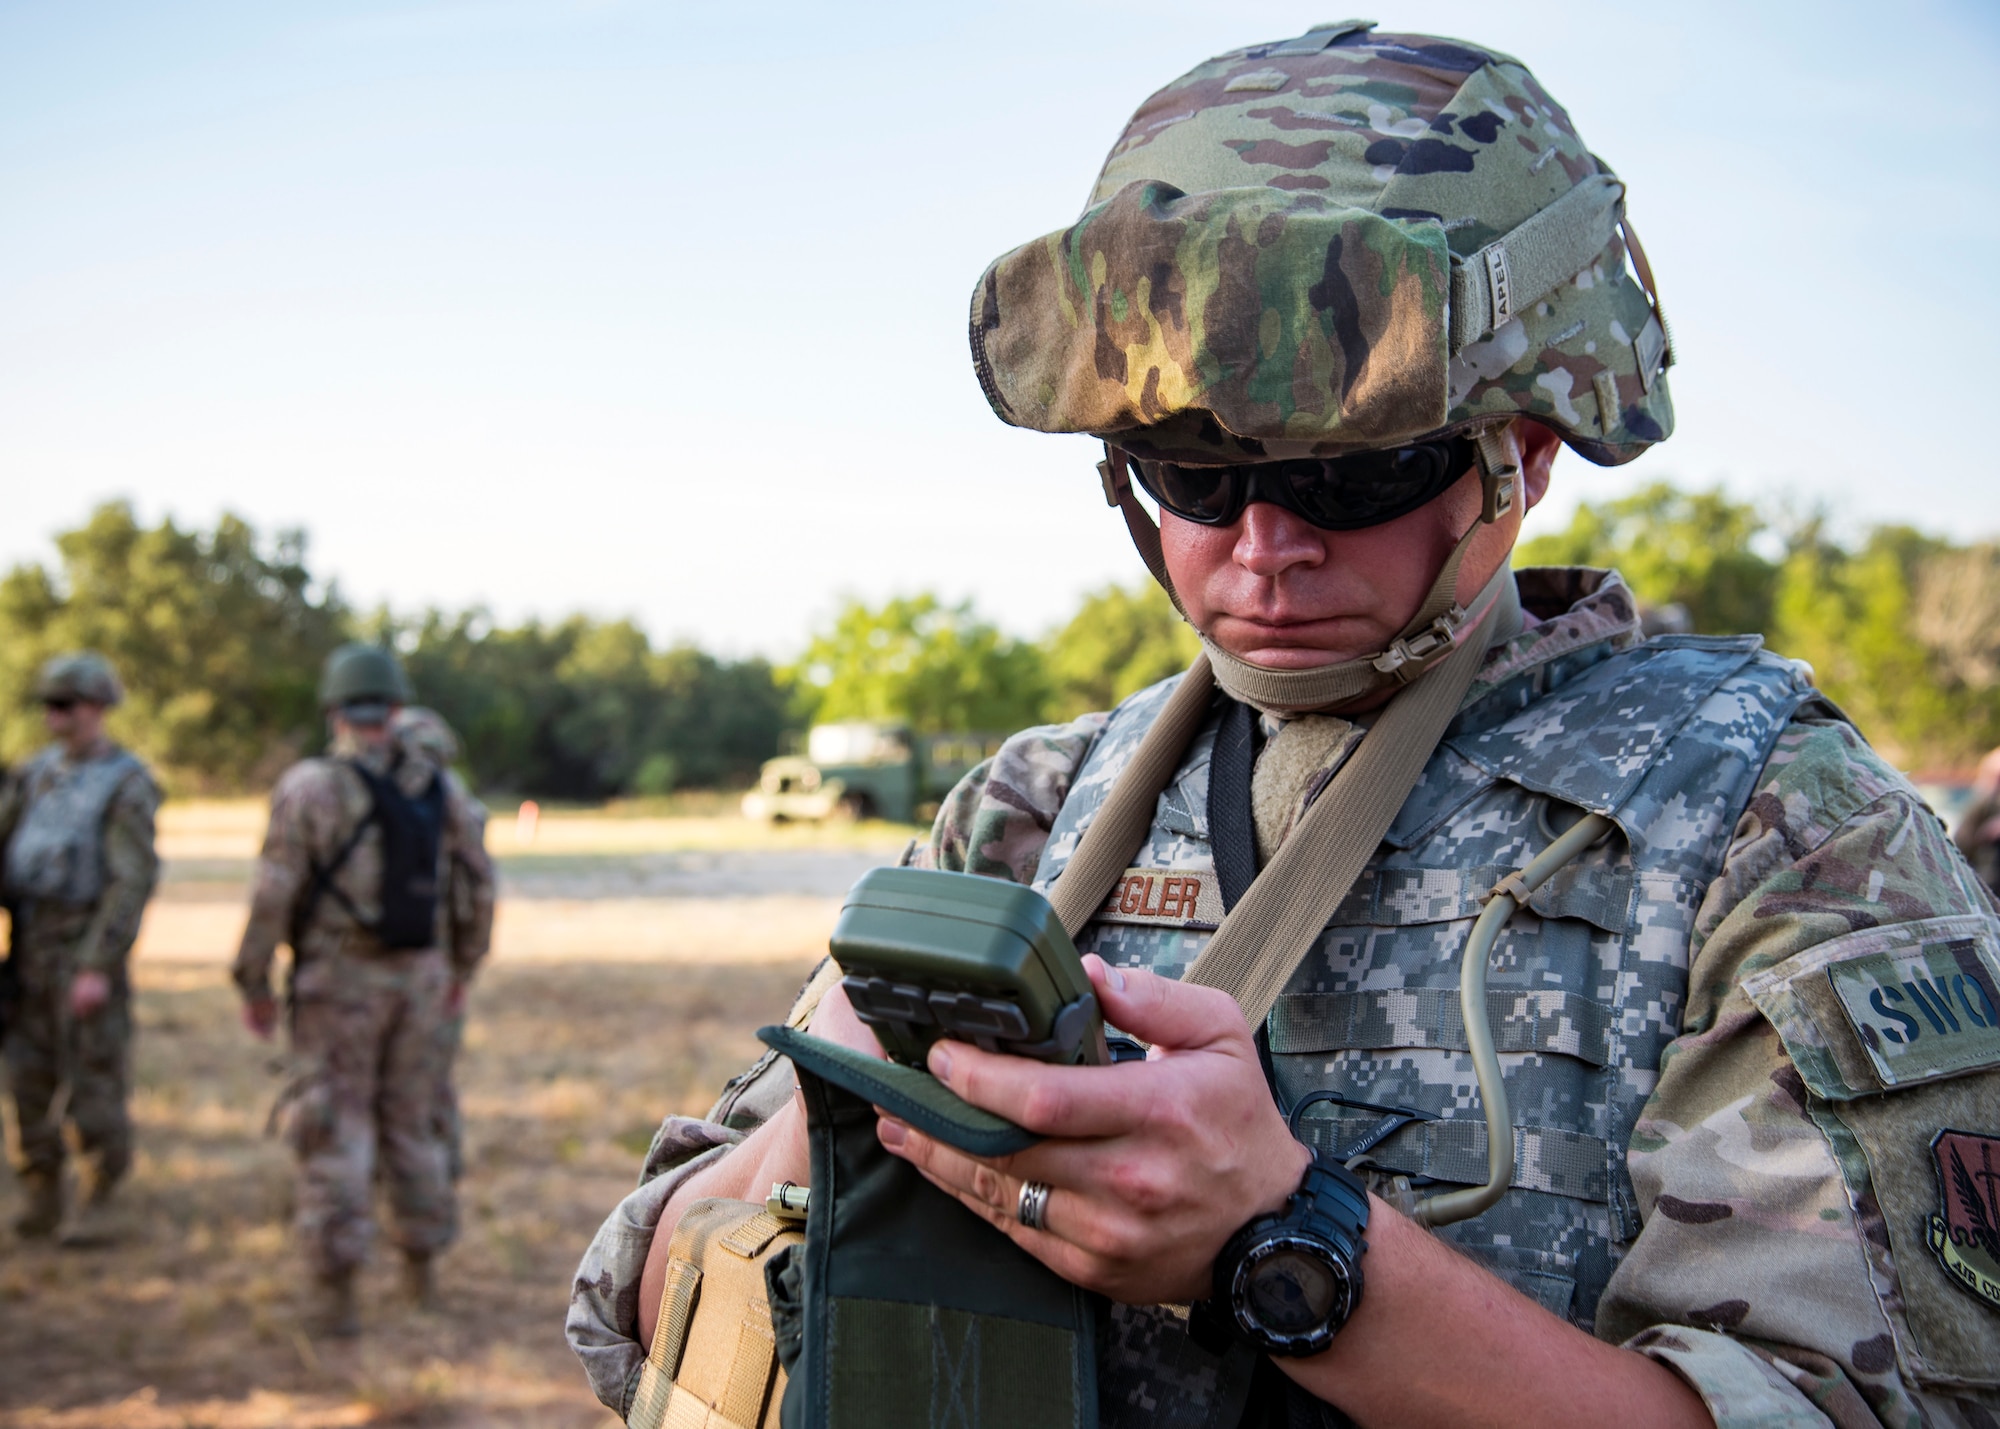 Master Sgt. Ryan Kegler, 3d Weather Squadron Det 1 section chief of division weather operations, reads a defense advanced GPS receiver during a certification field exercise (CFX), July 31, 2019, at Camp Bowie Training Center, Texas. The CFX was designed to evaluate the squadron’s overall tactical ability and readiness to provide the U.S. Army with full spectrum environmental support to the Joint Task Force (JTF) fight. The CFX immersed Airmen into all the aspects of what could come with a deployment such as Land Navigation. (U.S. Air Force photo by Airman 1st Class Eugene Oliver)